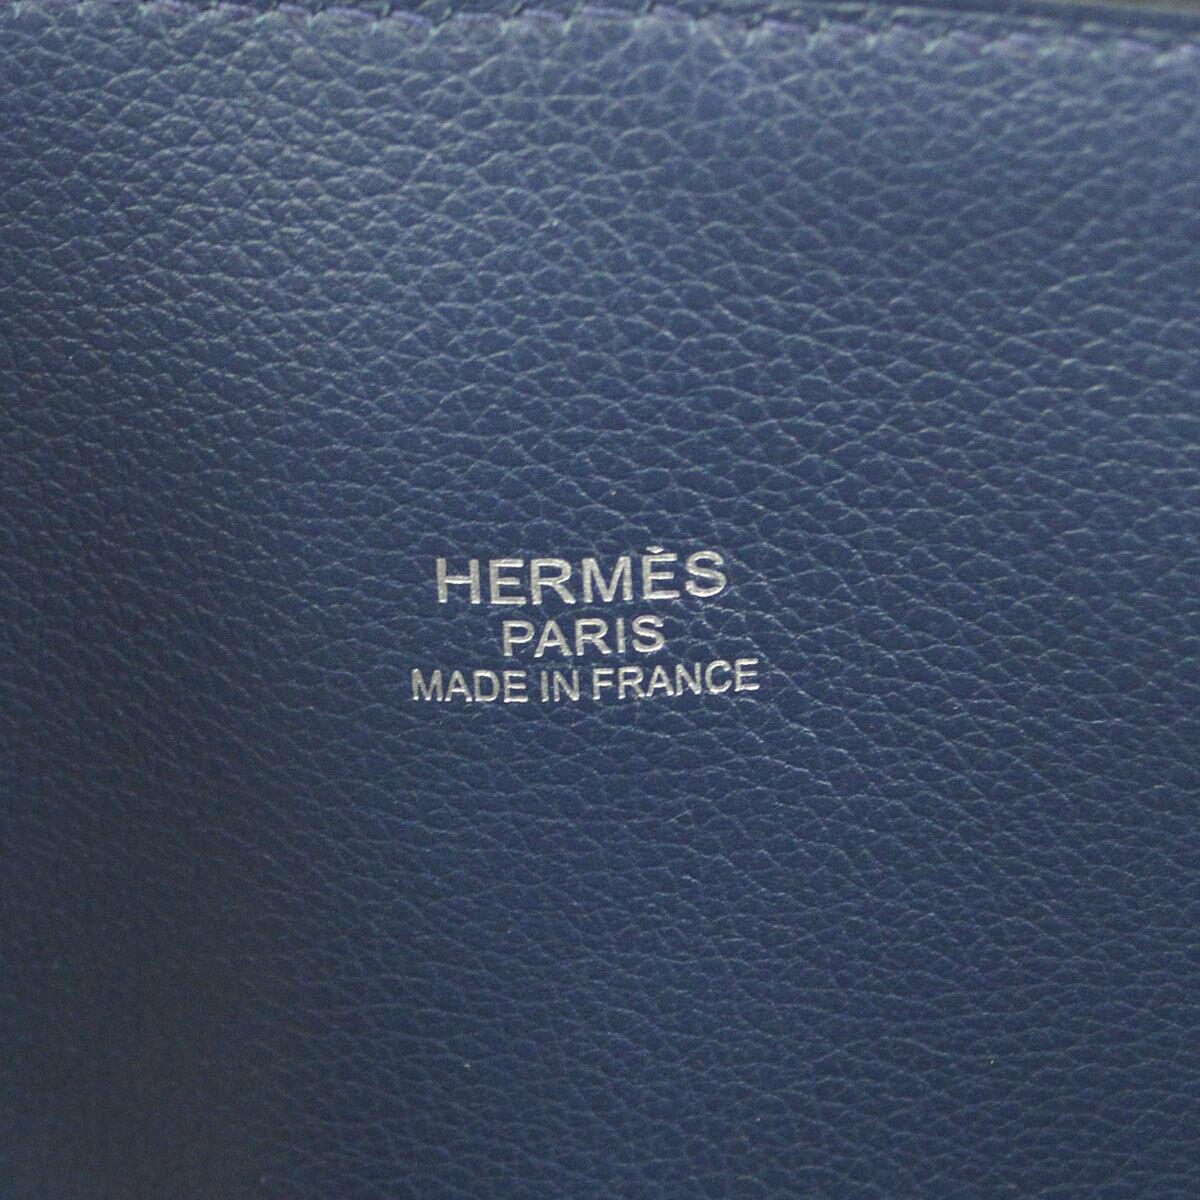 Hermes NEW Blue White Leather Stitch Top Handle Satchel Carryall Travel Tote Bag 1